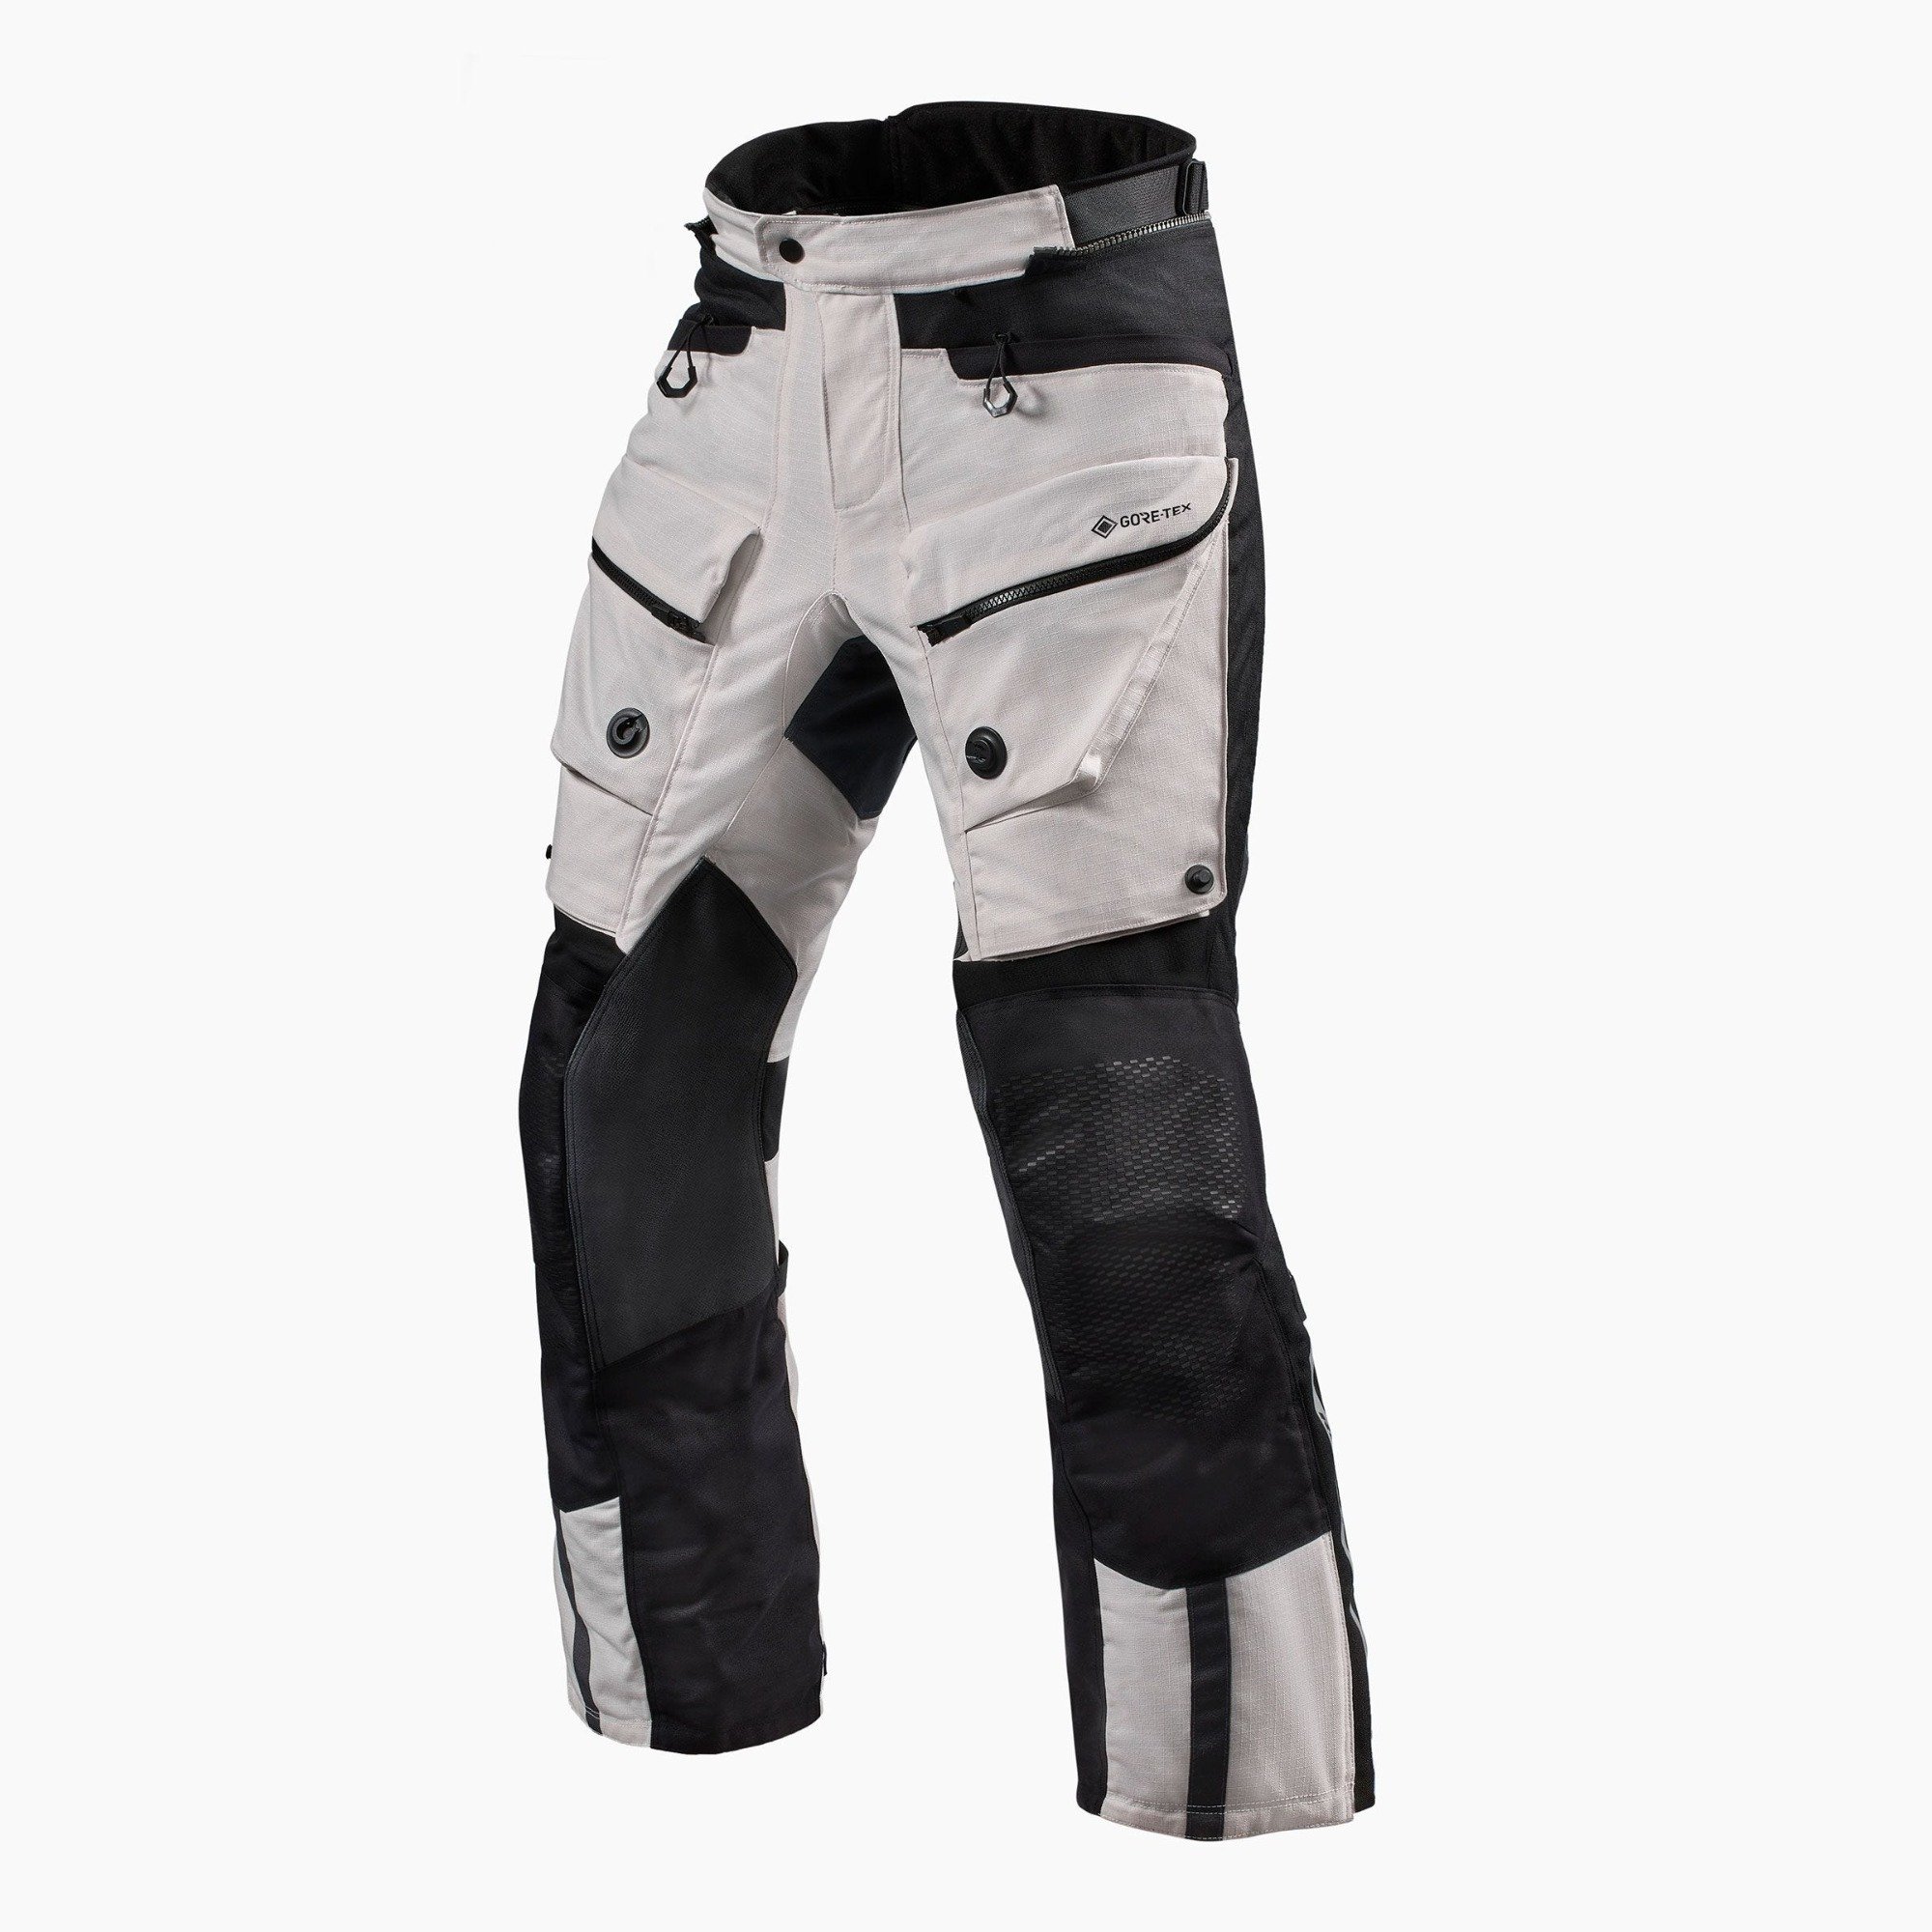 Image of REV'IT! Trousers Defender 3 GTX Silver Black Standard Motorcycle Pants Size L ID 8700001319959